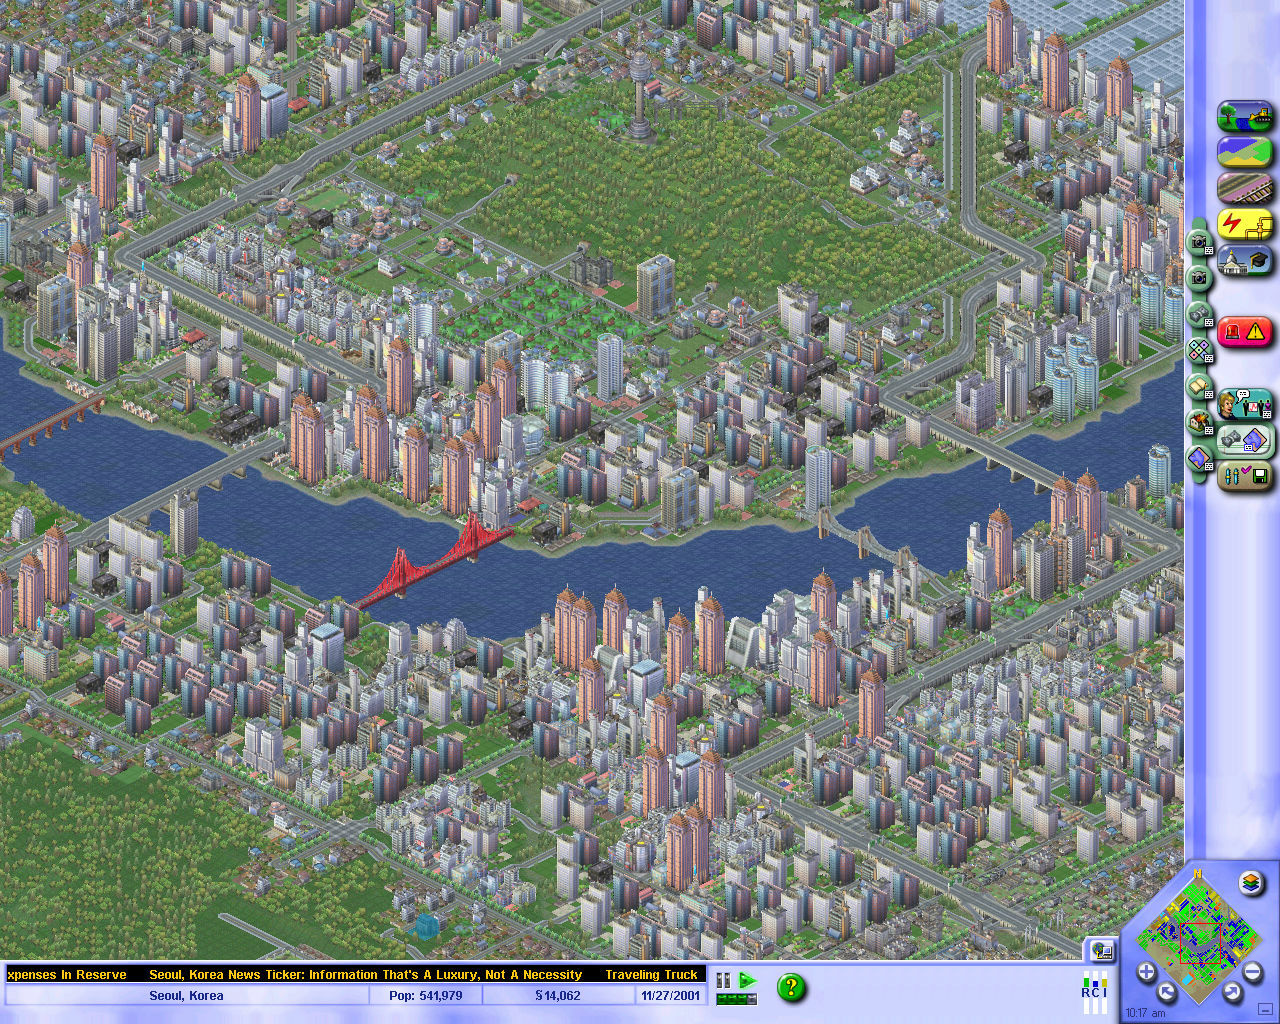 simcity 3000 unlimited